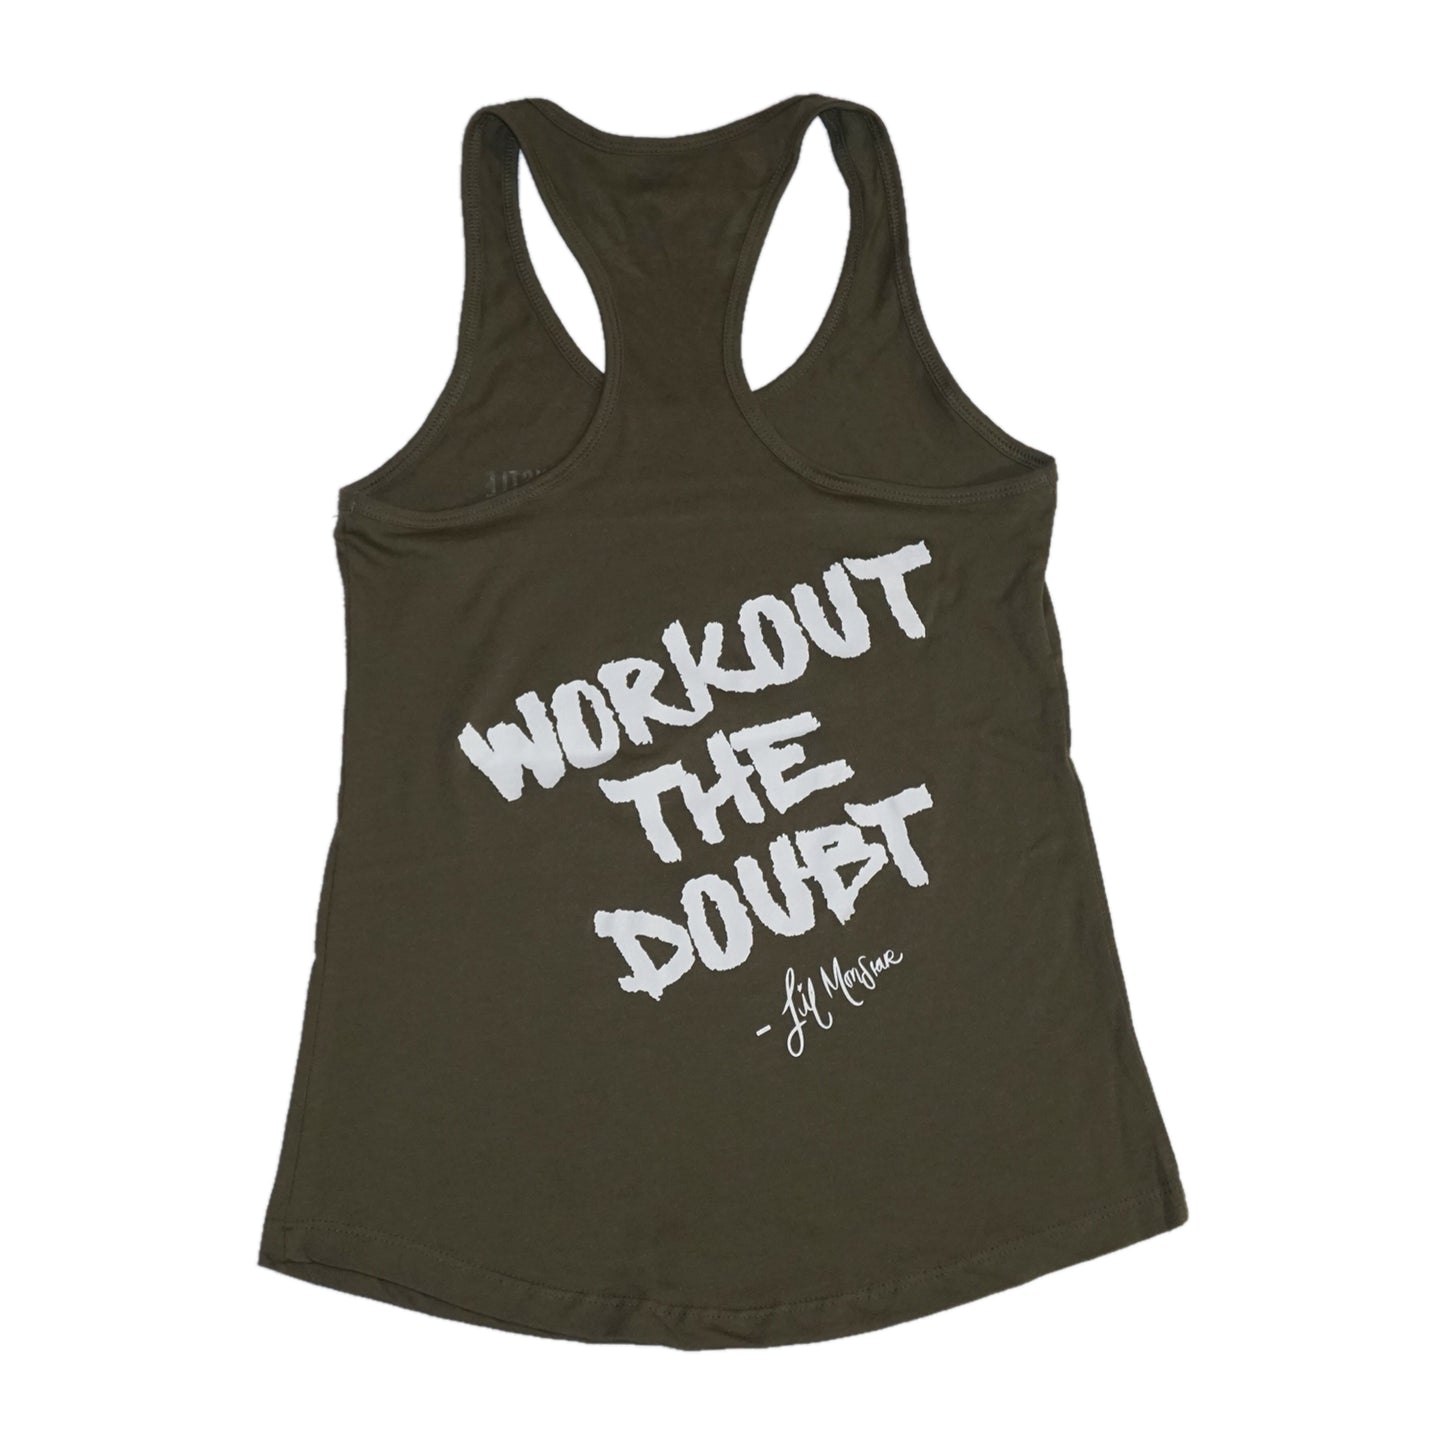 Women's Military Racerback: "Workout the Doubt" - Lil Monstar Edition